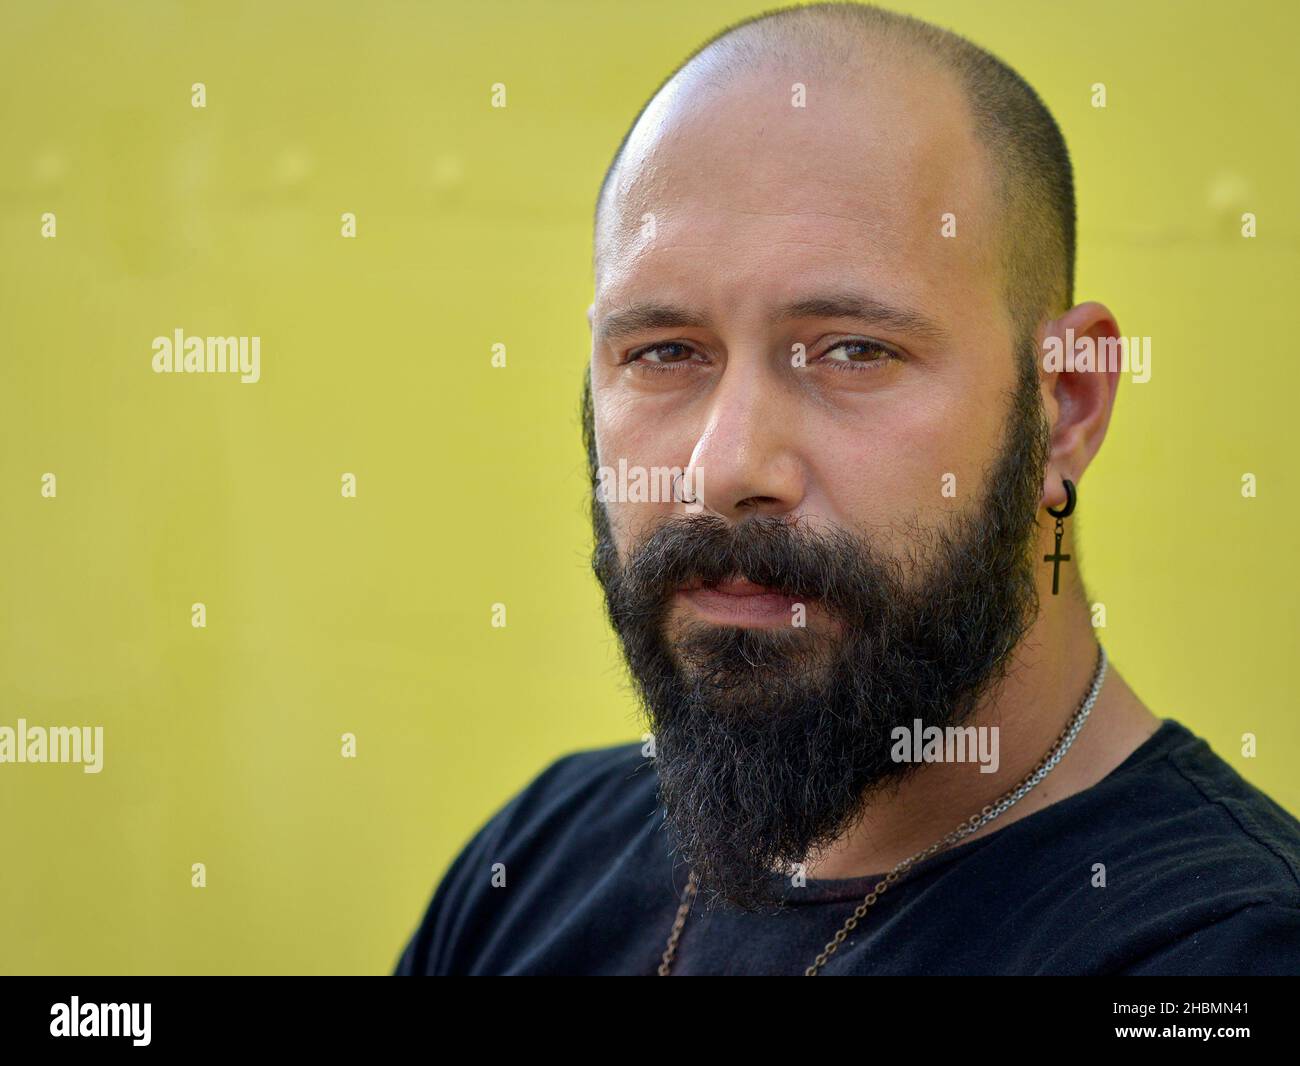 Handsome masculine resourceful young Caucasian man with high forehead, black beard and Christian cross earring looks sternly at the viewer. Stock Photo